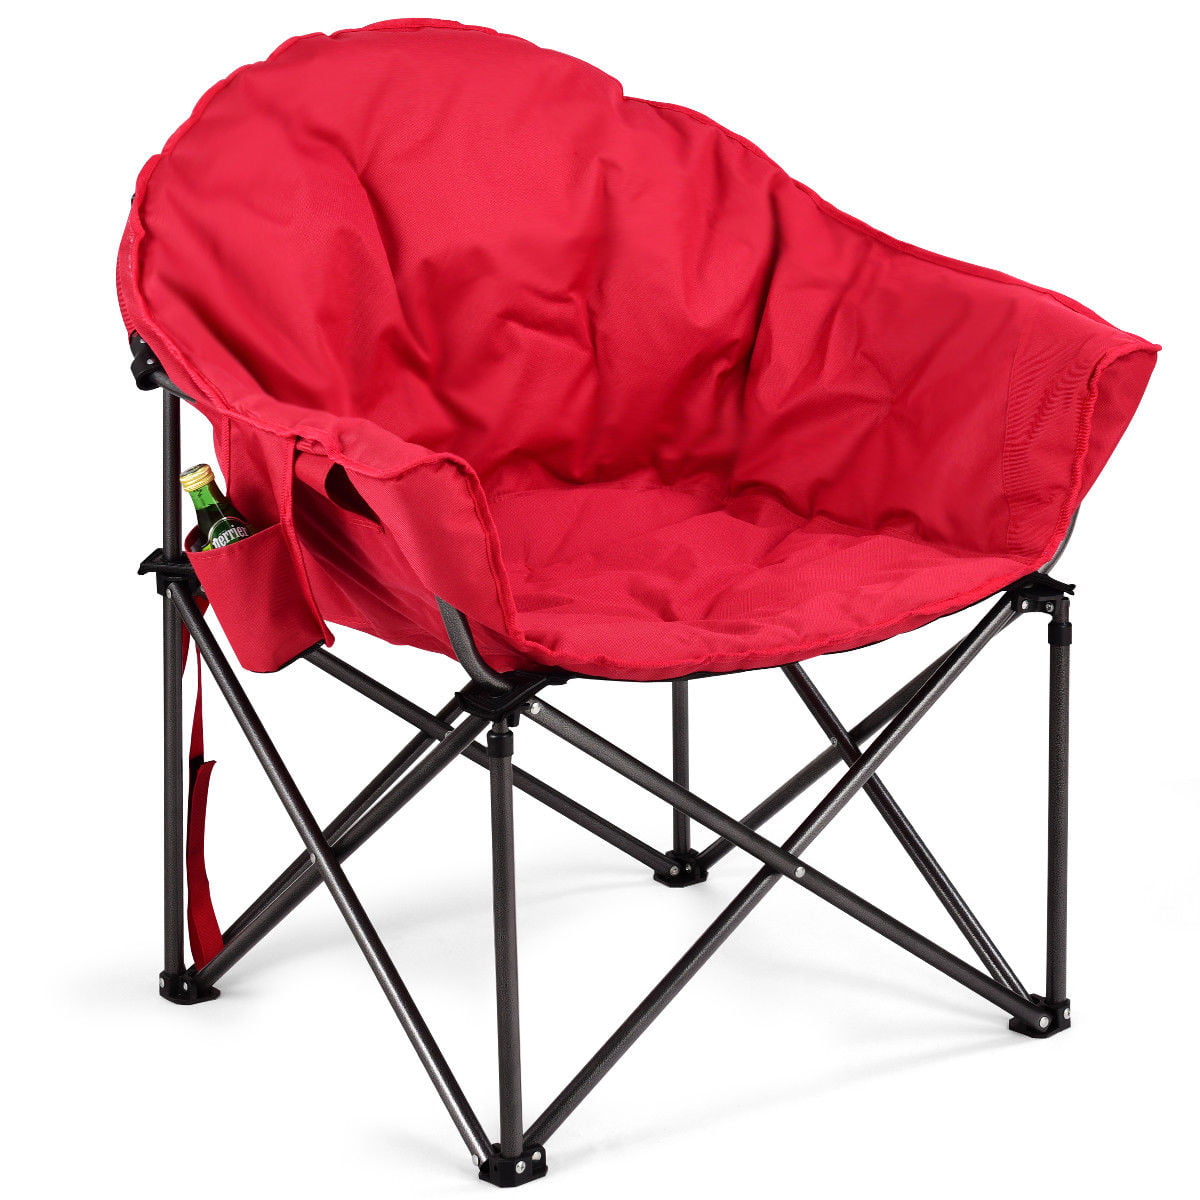 Oversized Saucer Moon Folding Camping Chair Padded Seat w/ Cup Holder